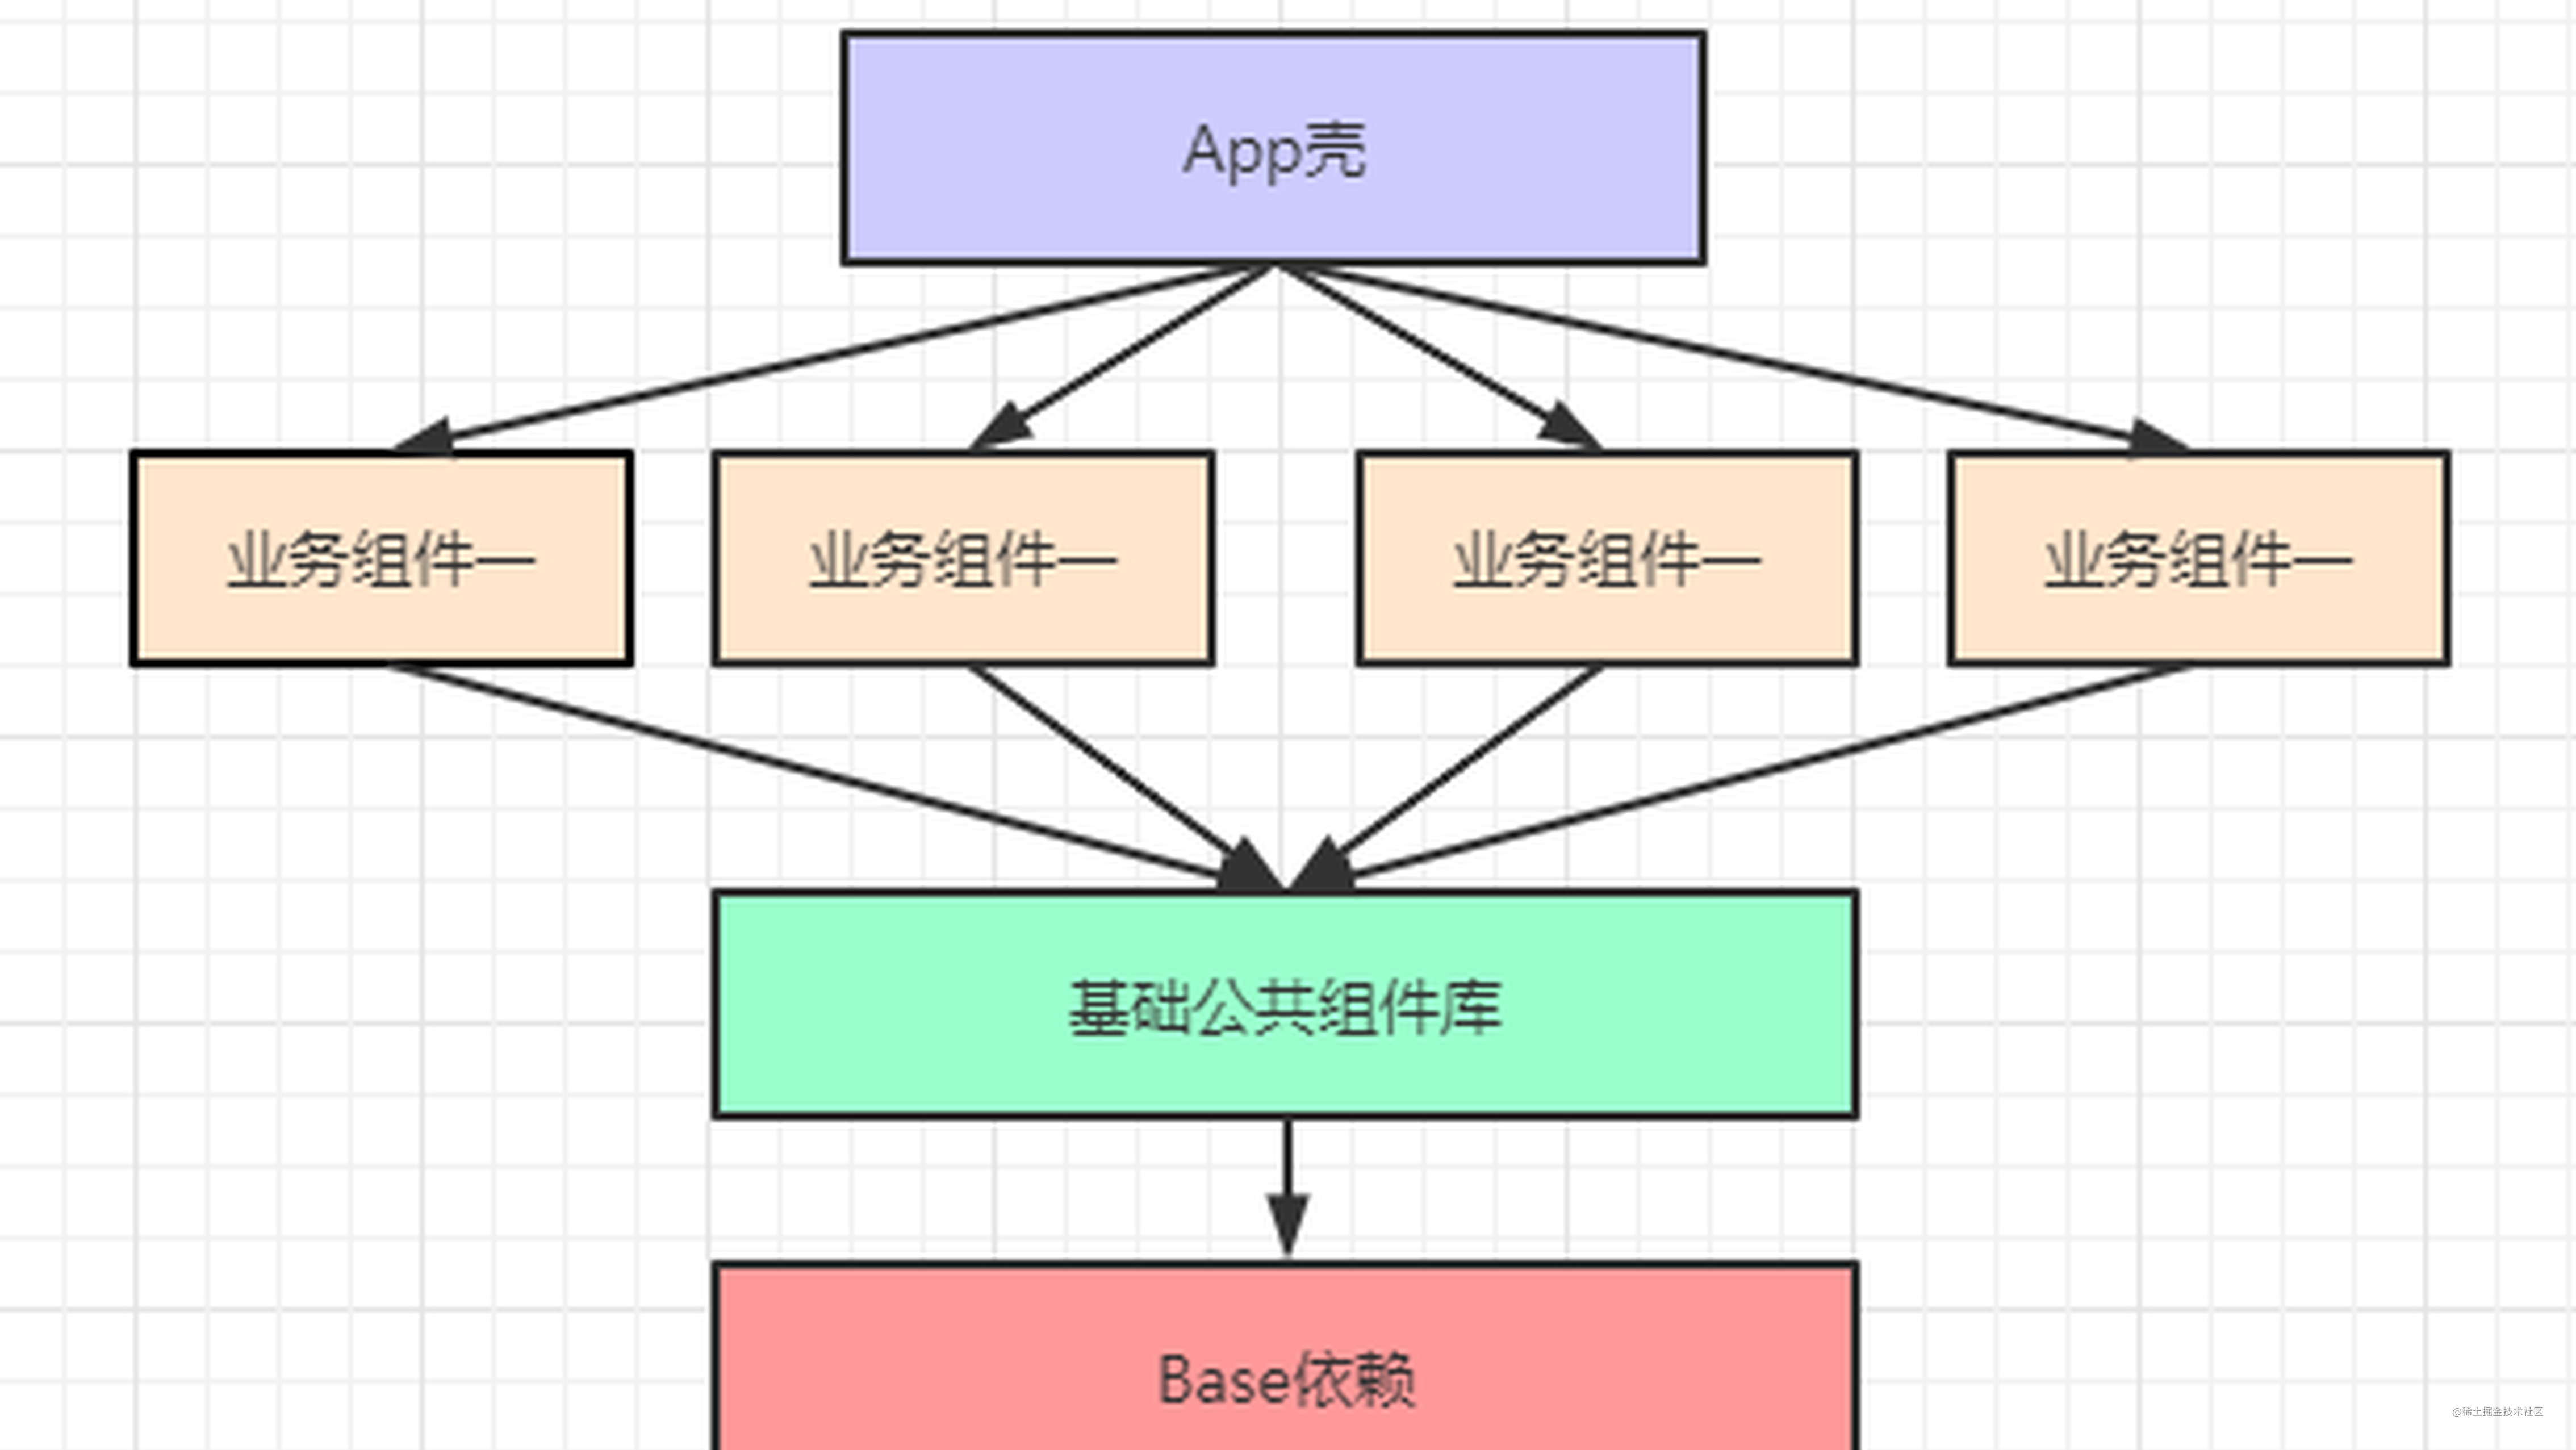 Android AutoService 组件化